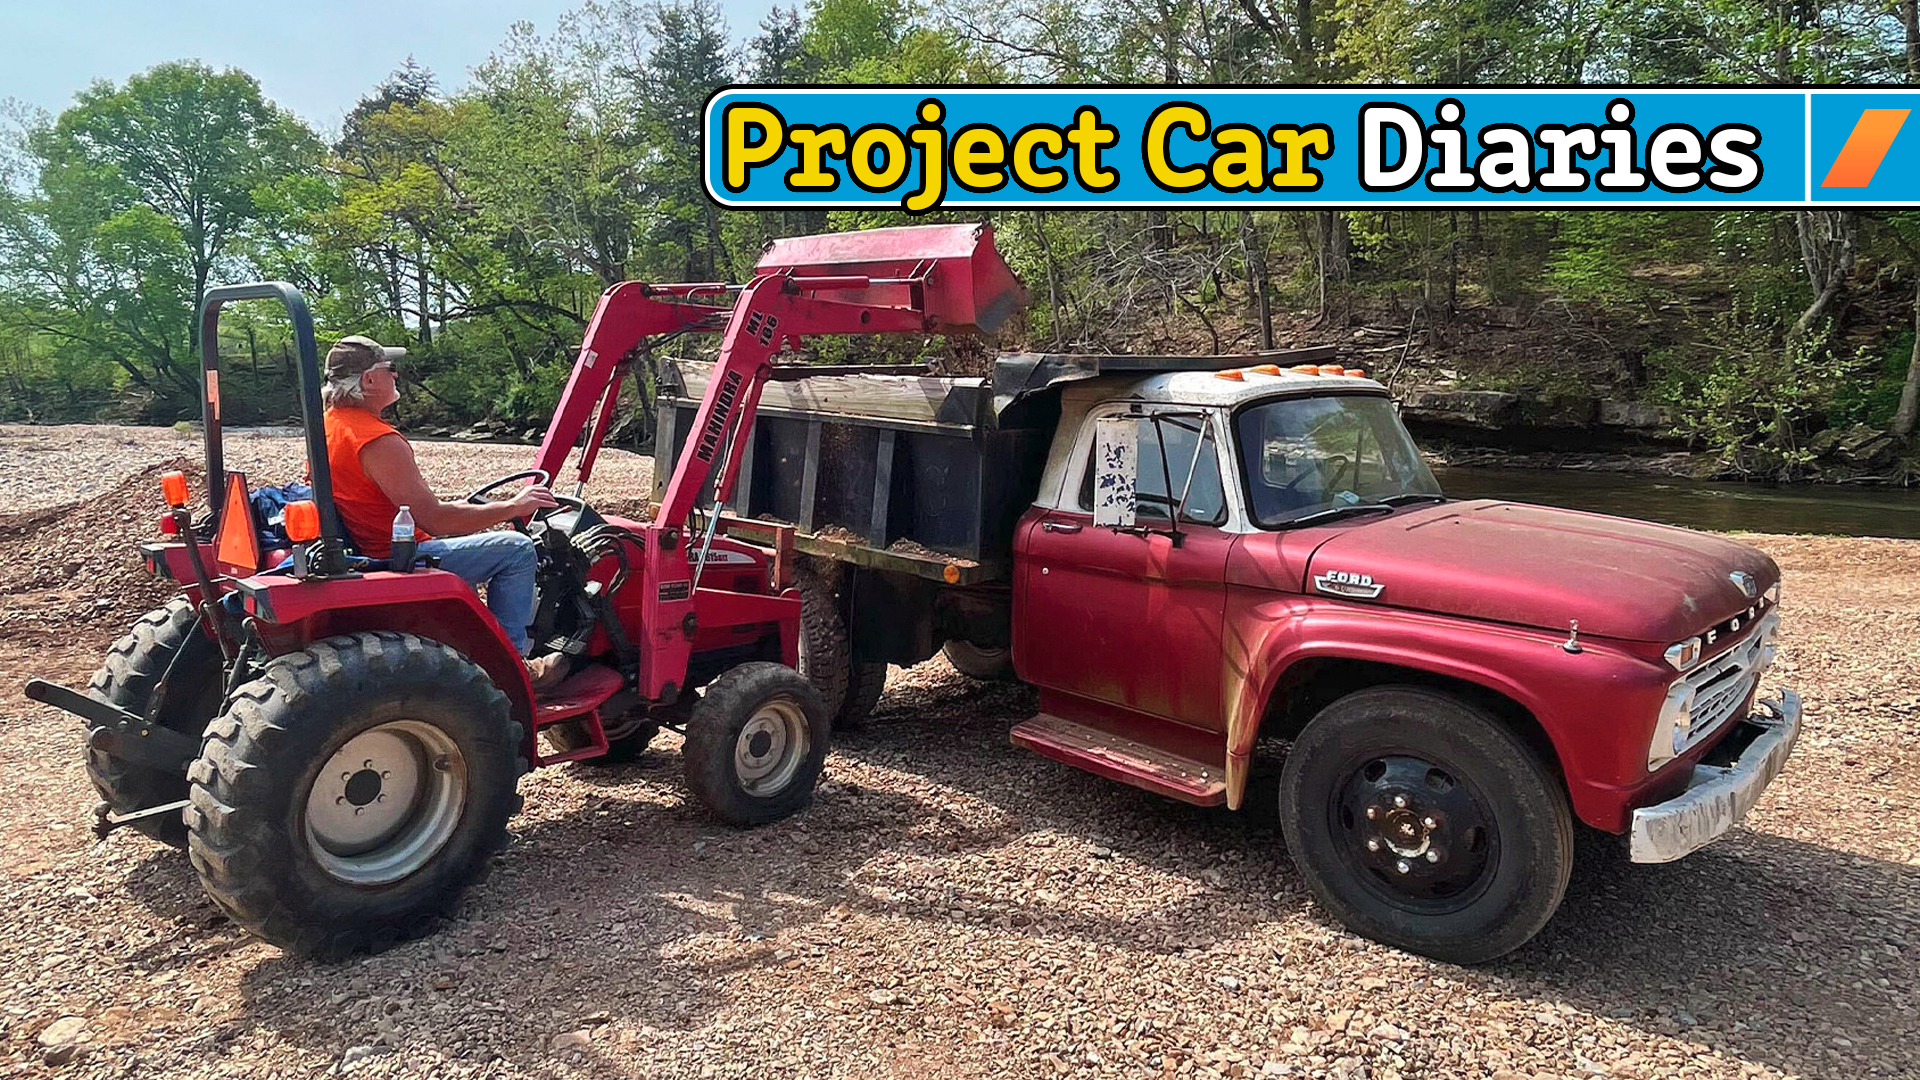 Project Car Diaries photo